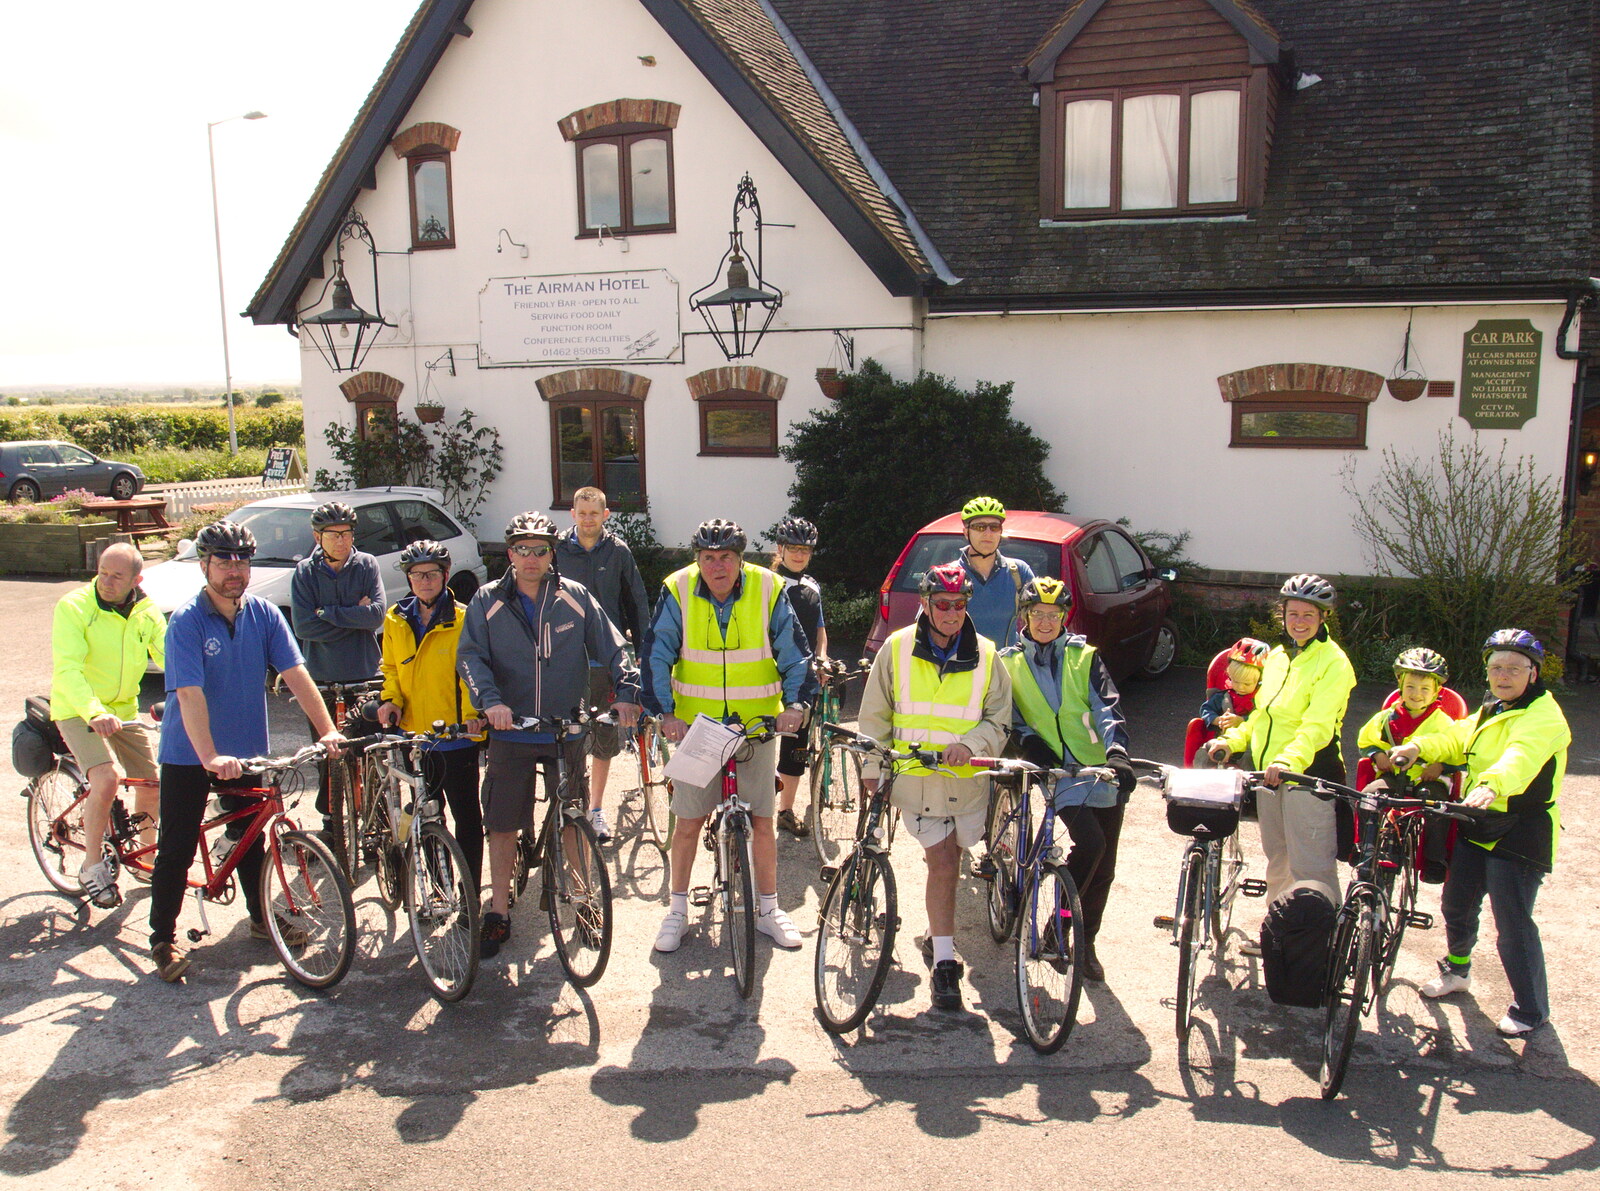 A group photo from A Return to Bedford: the BSCC Annual Weekend Away, Shefford, Bedfordshire - 10th May 2014